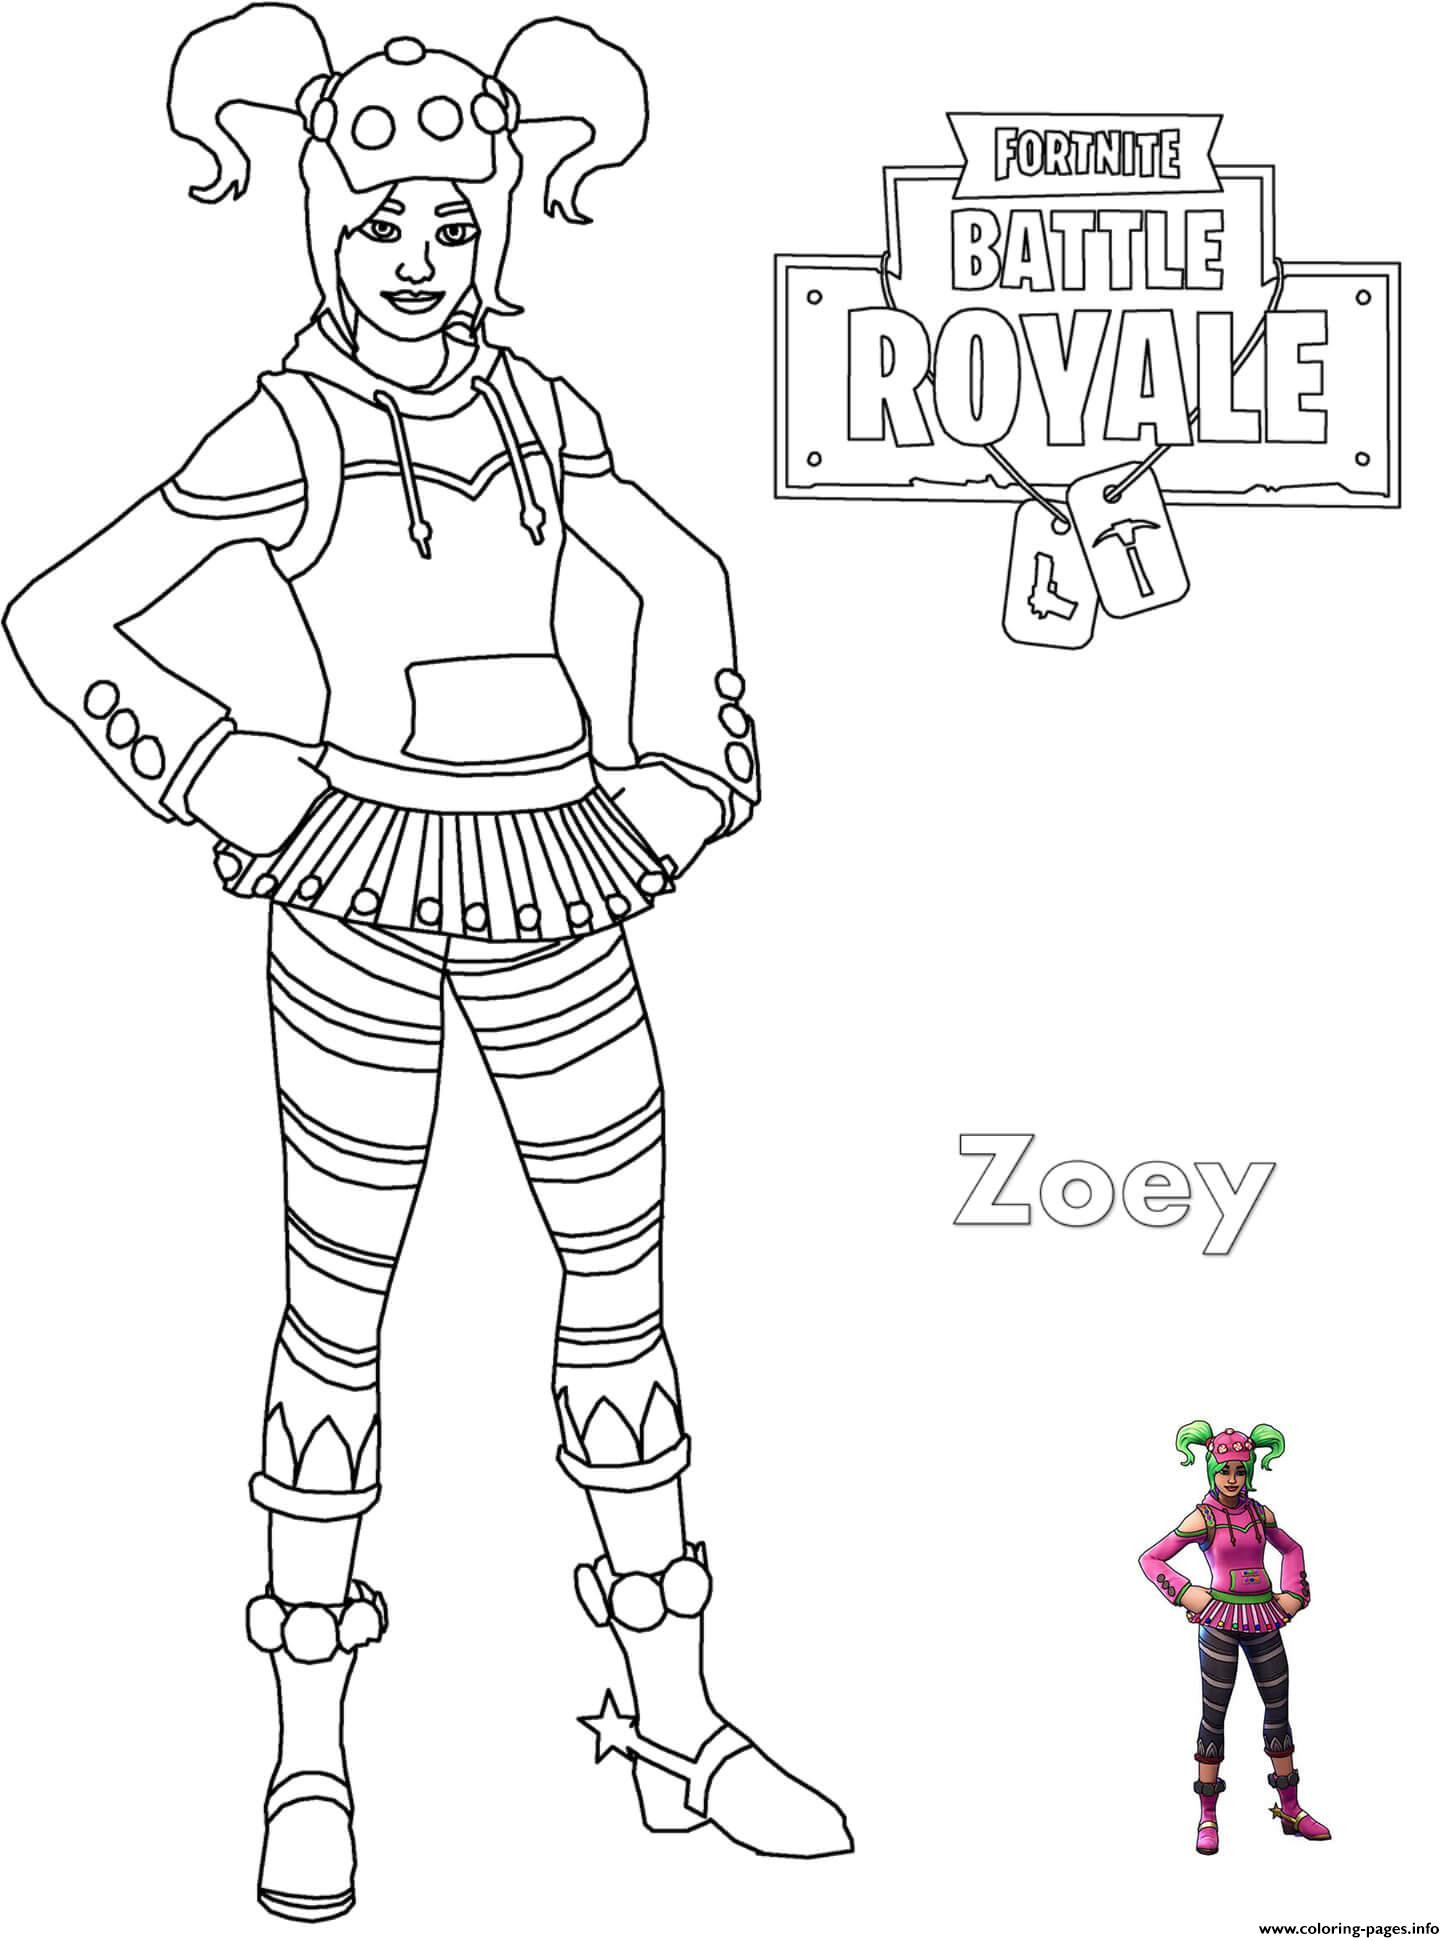 Coloring Pages For Girls Spelling Zoey
 Zoey Fortnite Girl Coloring Pages Printable